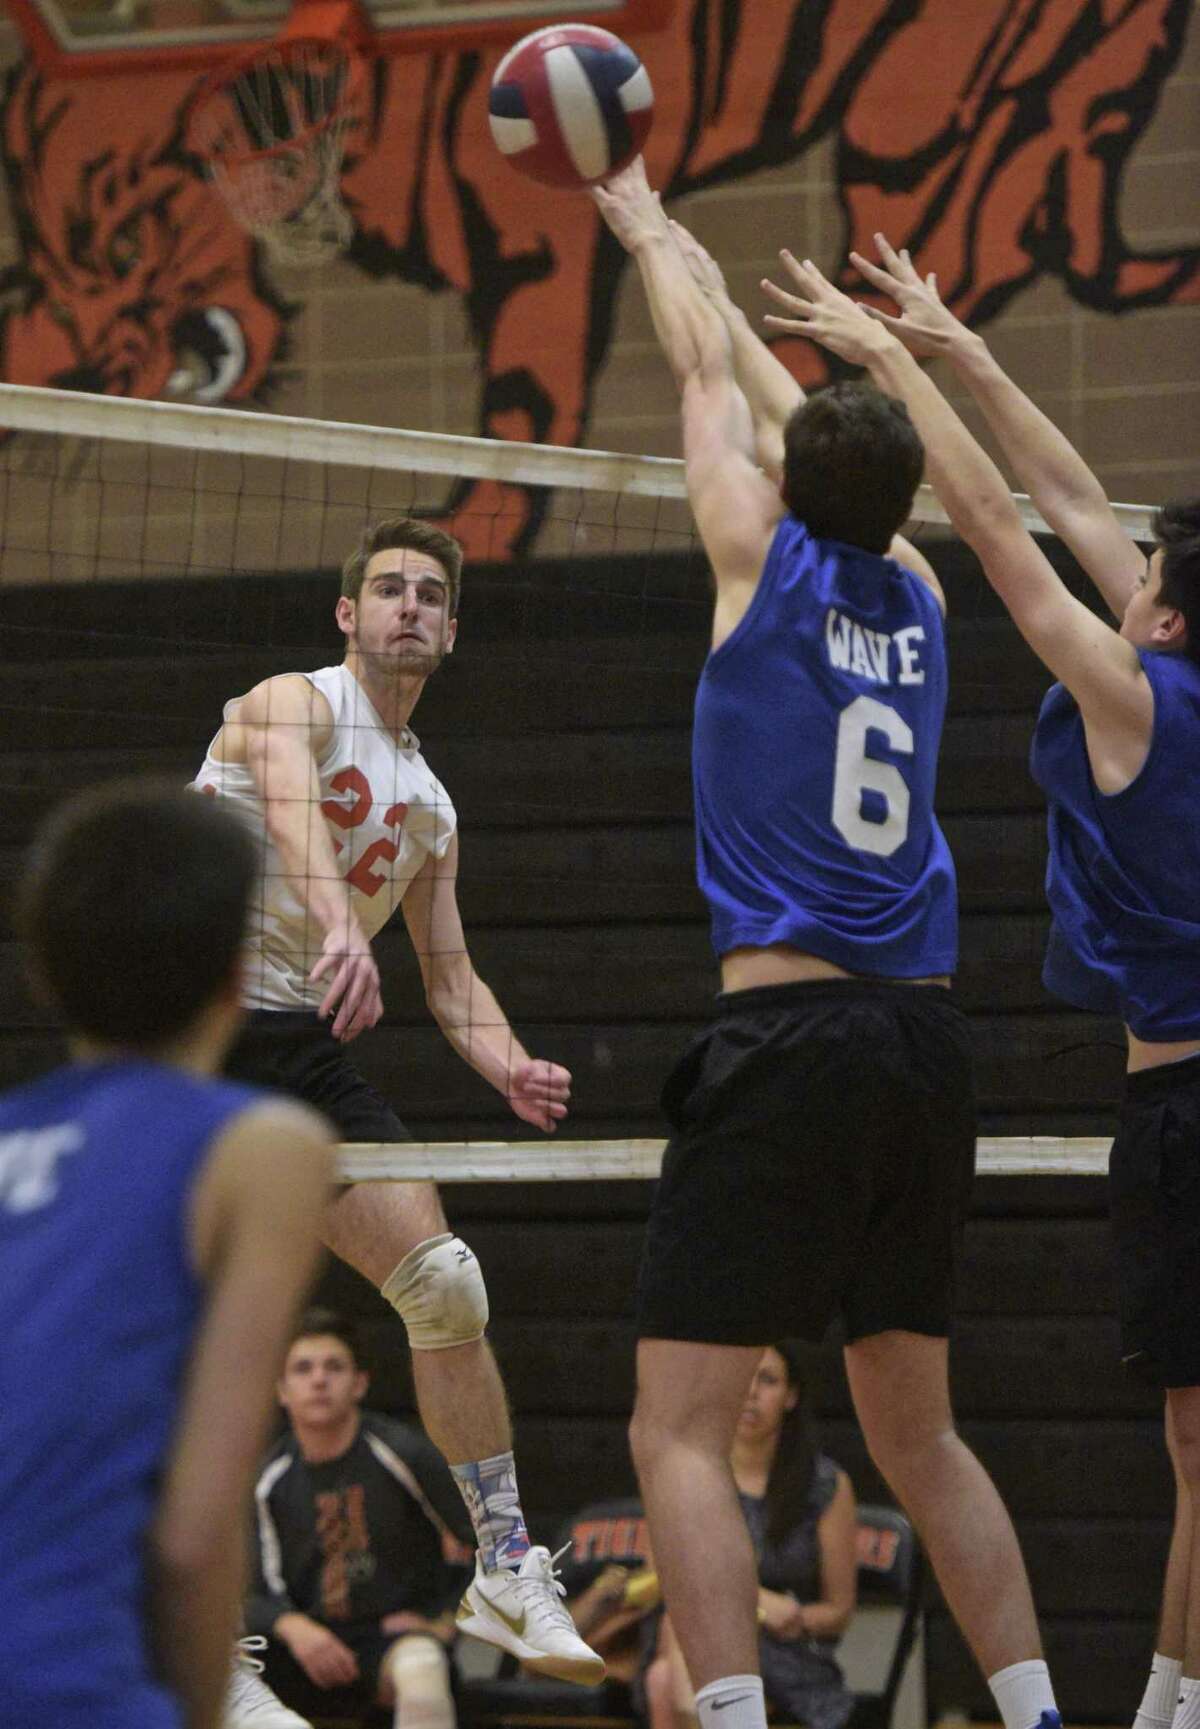 Ridgefield's Christian DeViro (22) spikes the ball past Darien's Jackson Roberson (6) and Nik Tinaj (18) in the boys Class L volleyball game between Darien and Ridgefield high schools. Friday afternoon, June 1, 2018, at Ridgefield High School, Ridgefield, Conn.